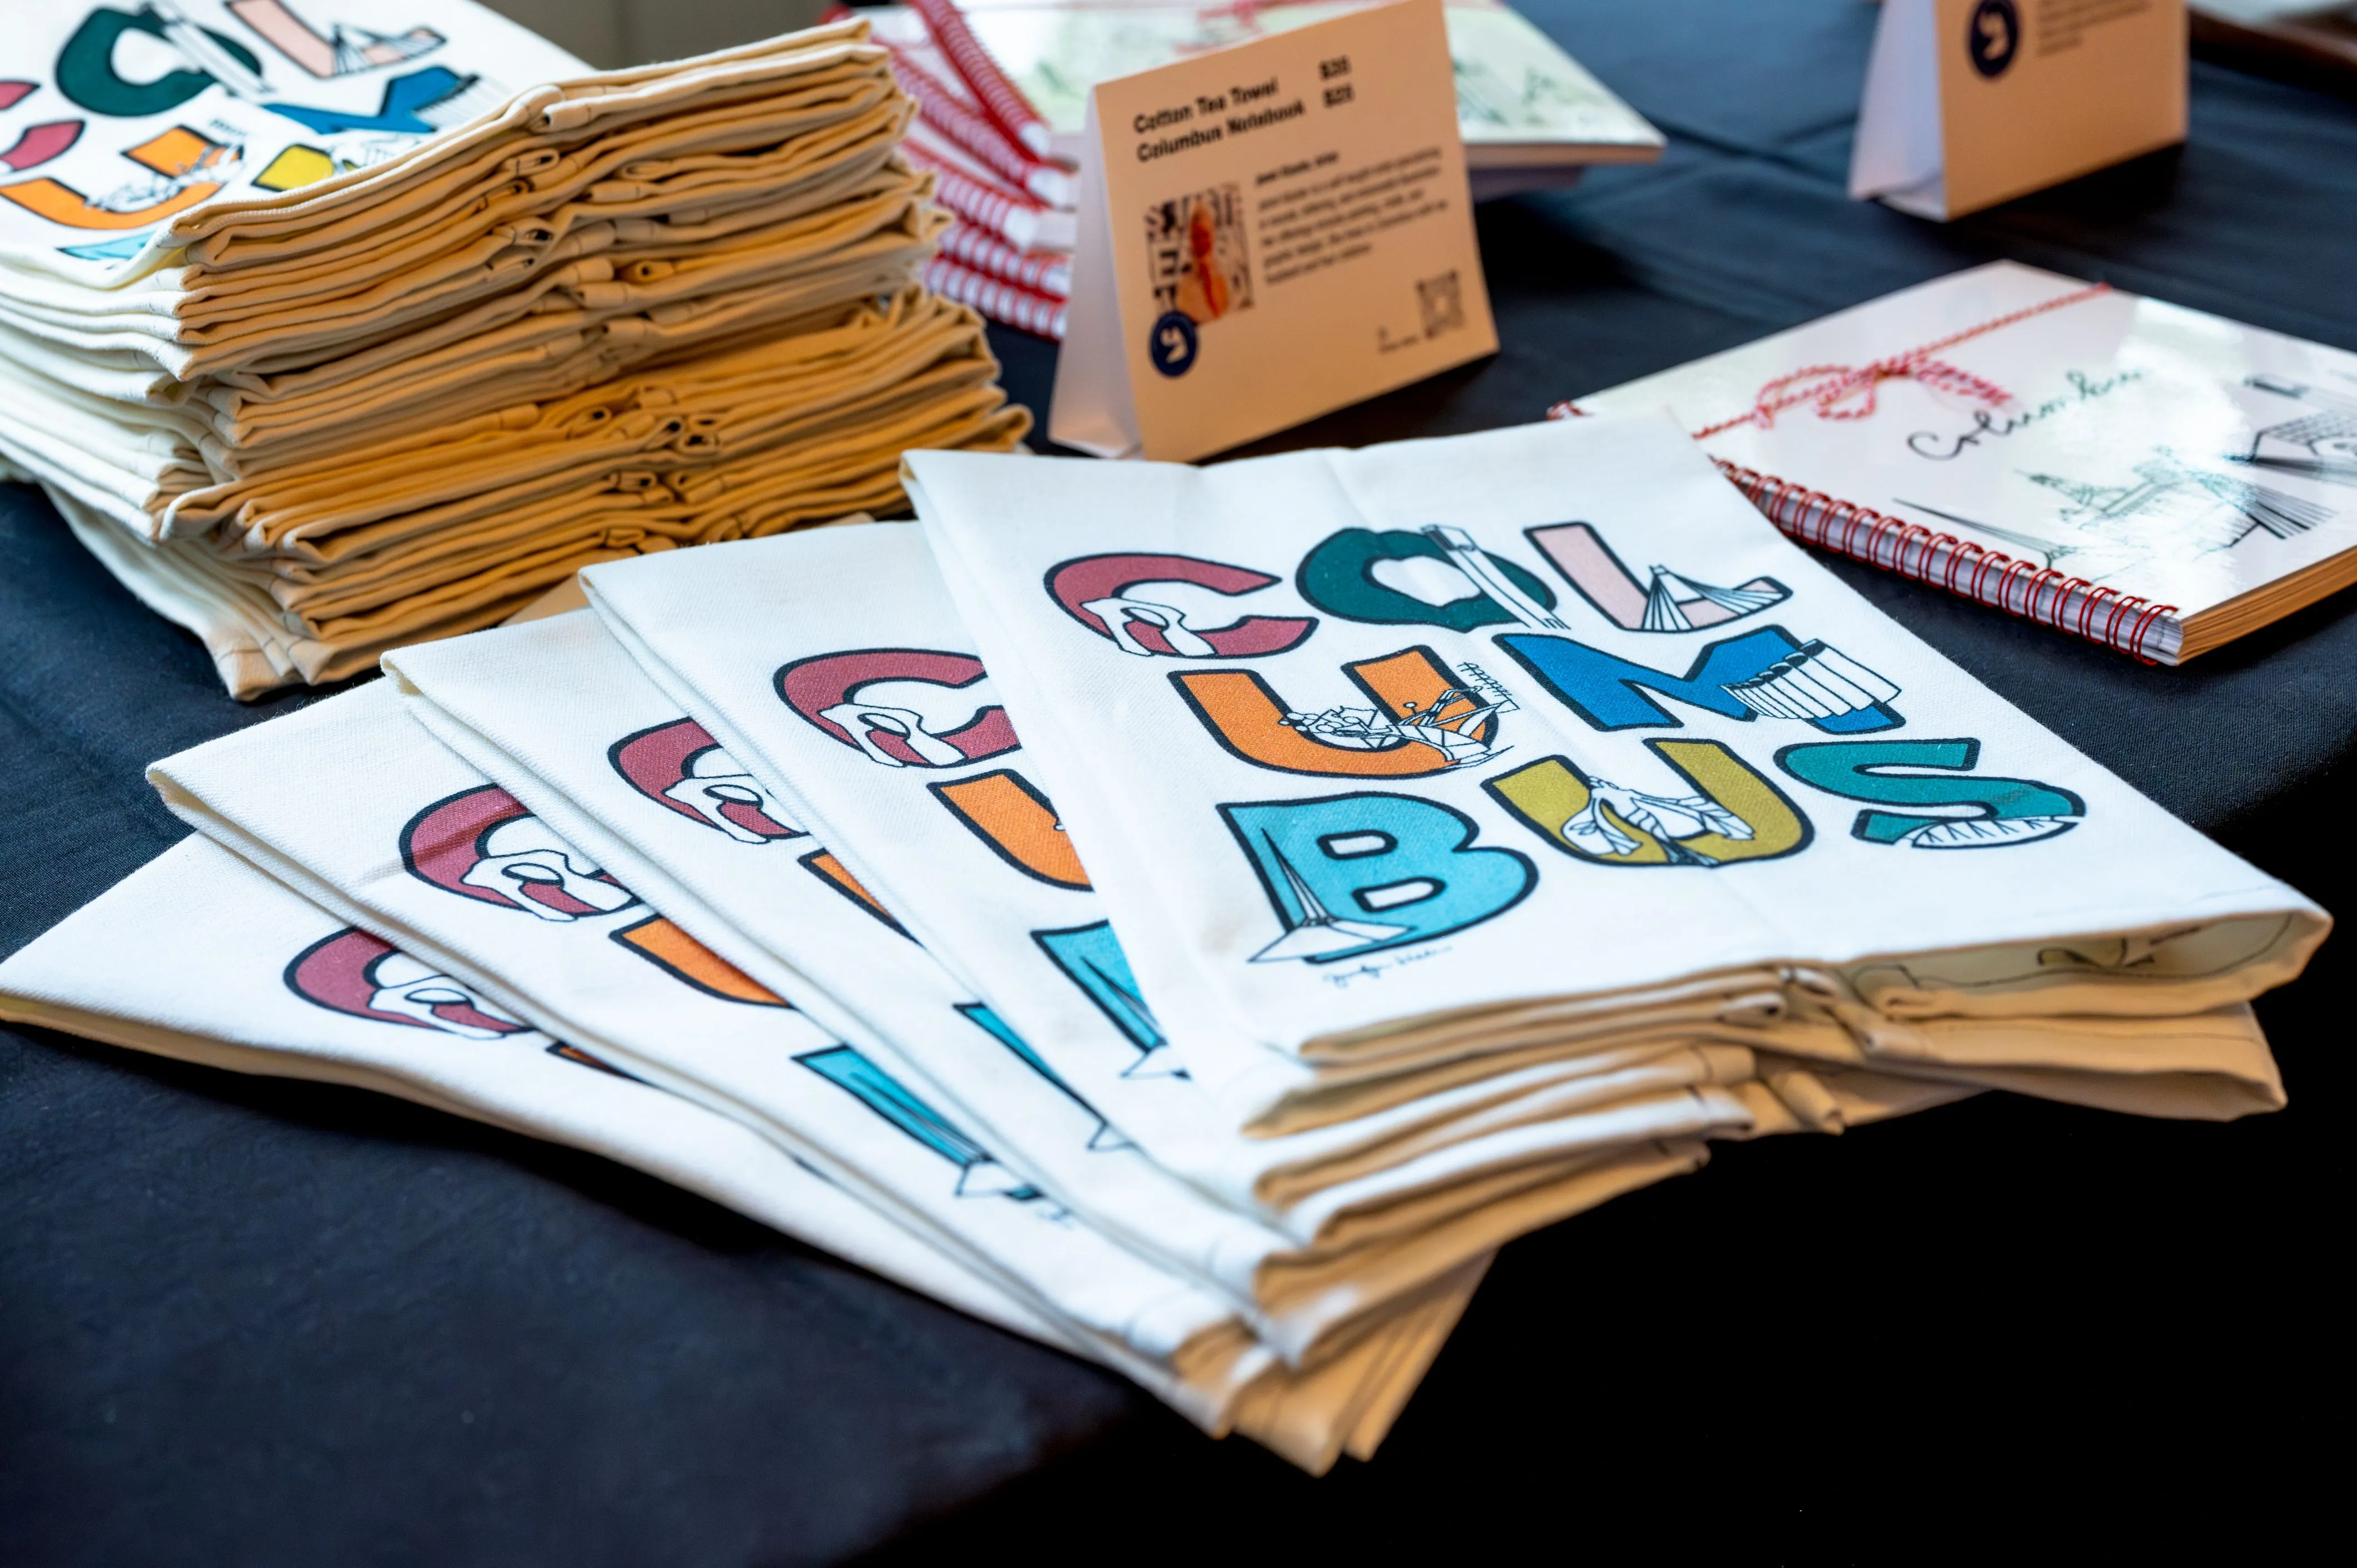 Stacks of colorful brochures with the text "COOL UK BUS" displayed on a table.